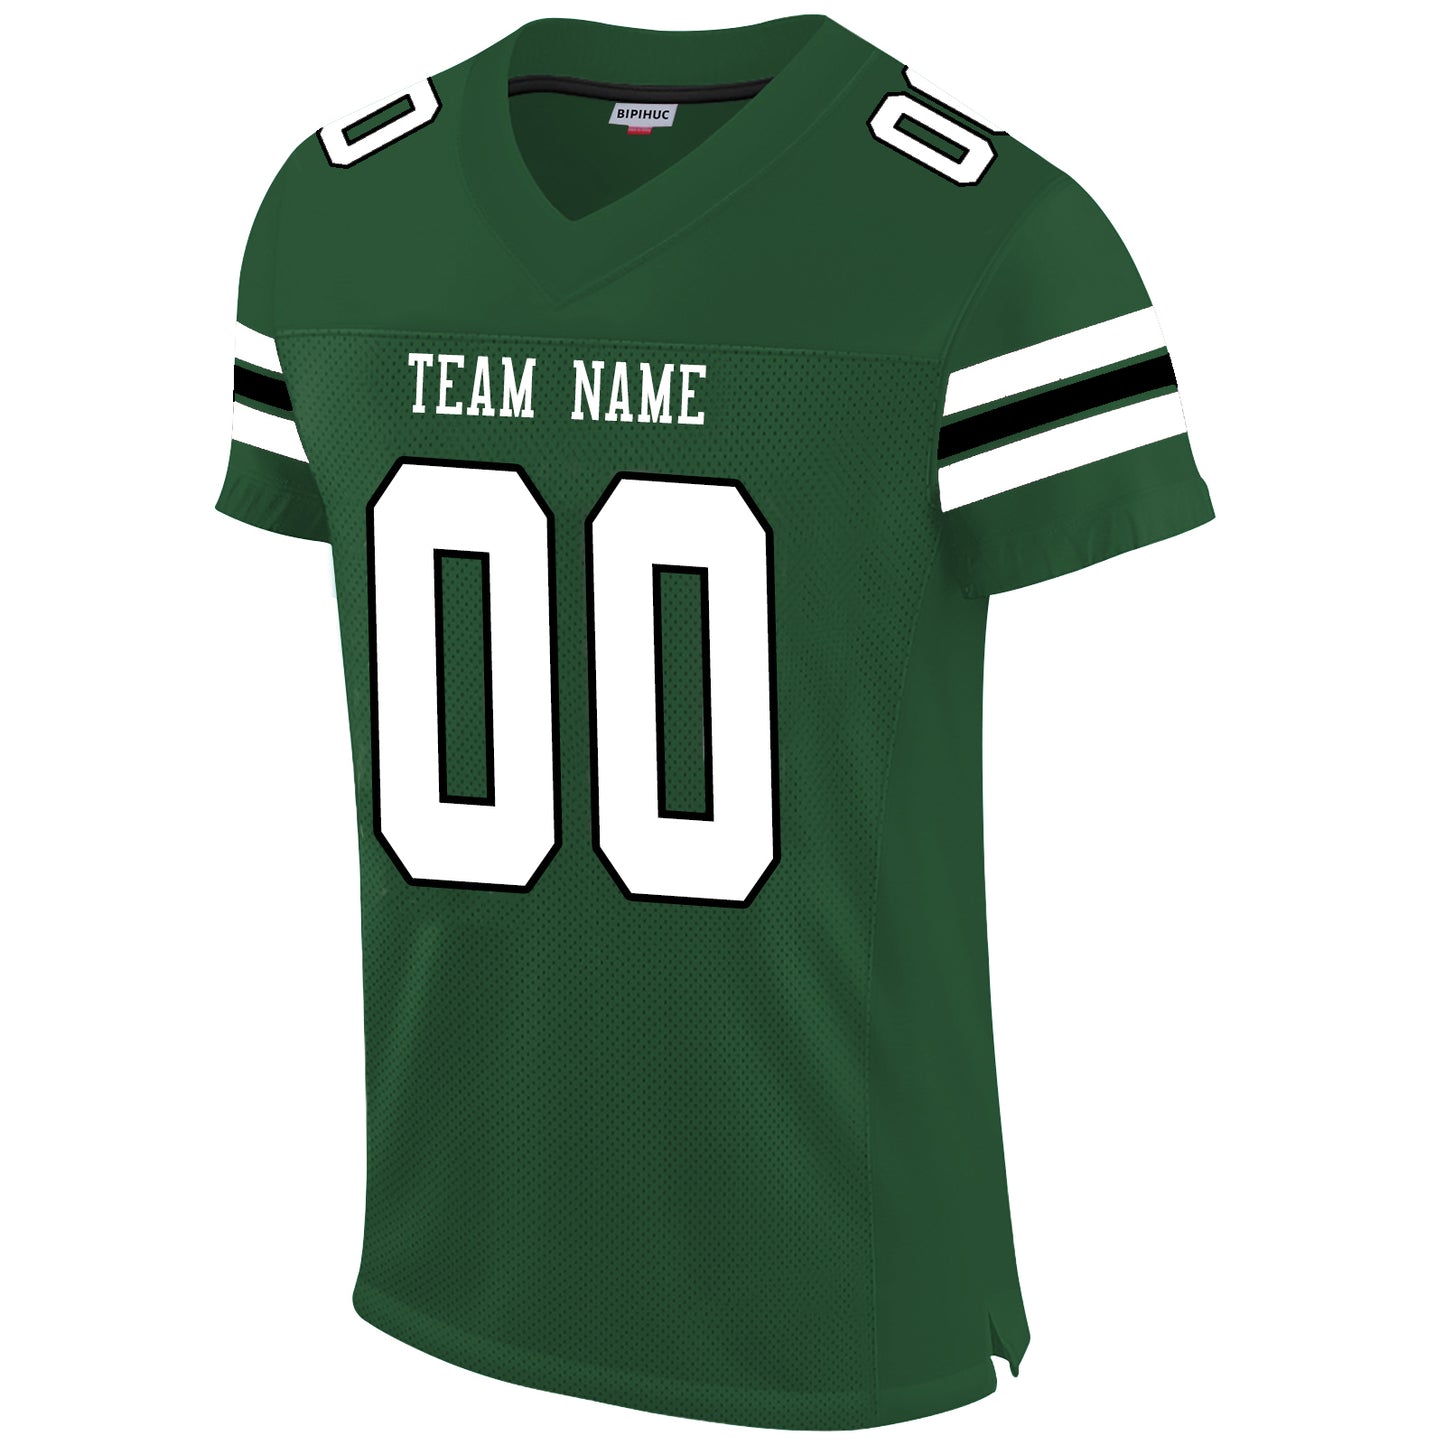 Custom Football Jersey for New York Jets Personalize Sports Shirt Design Stitched Name And Number Size S to 6XL Christmas Birthday Gift